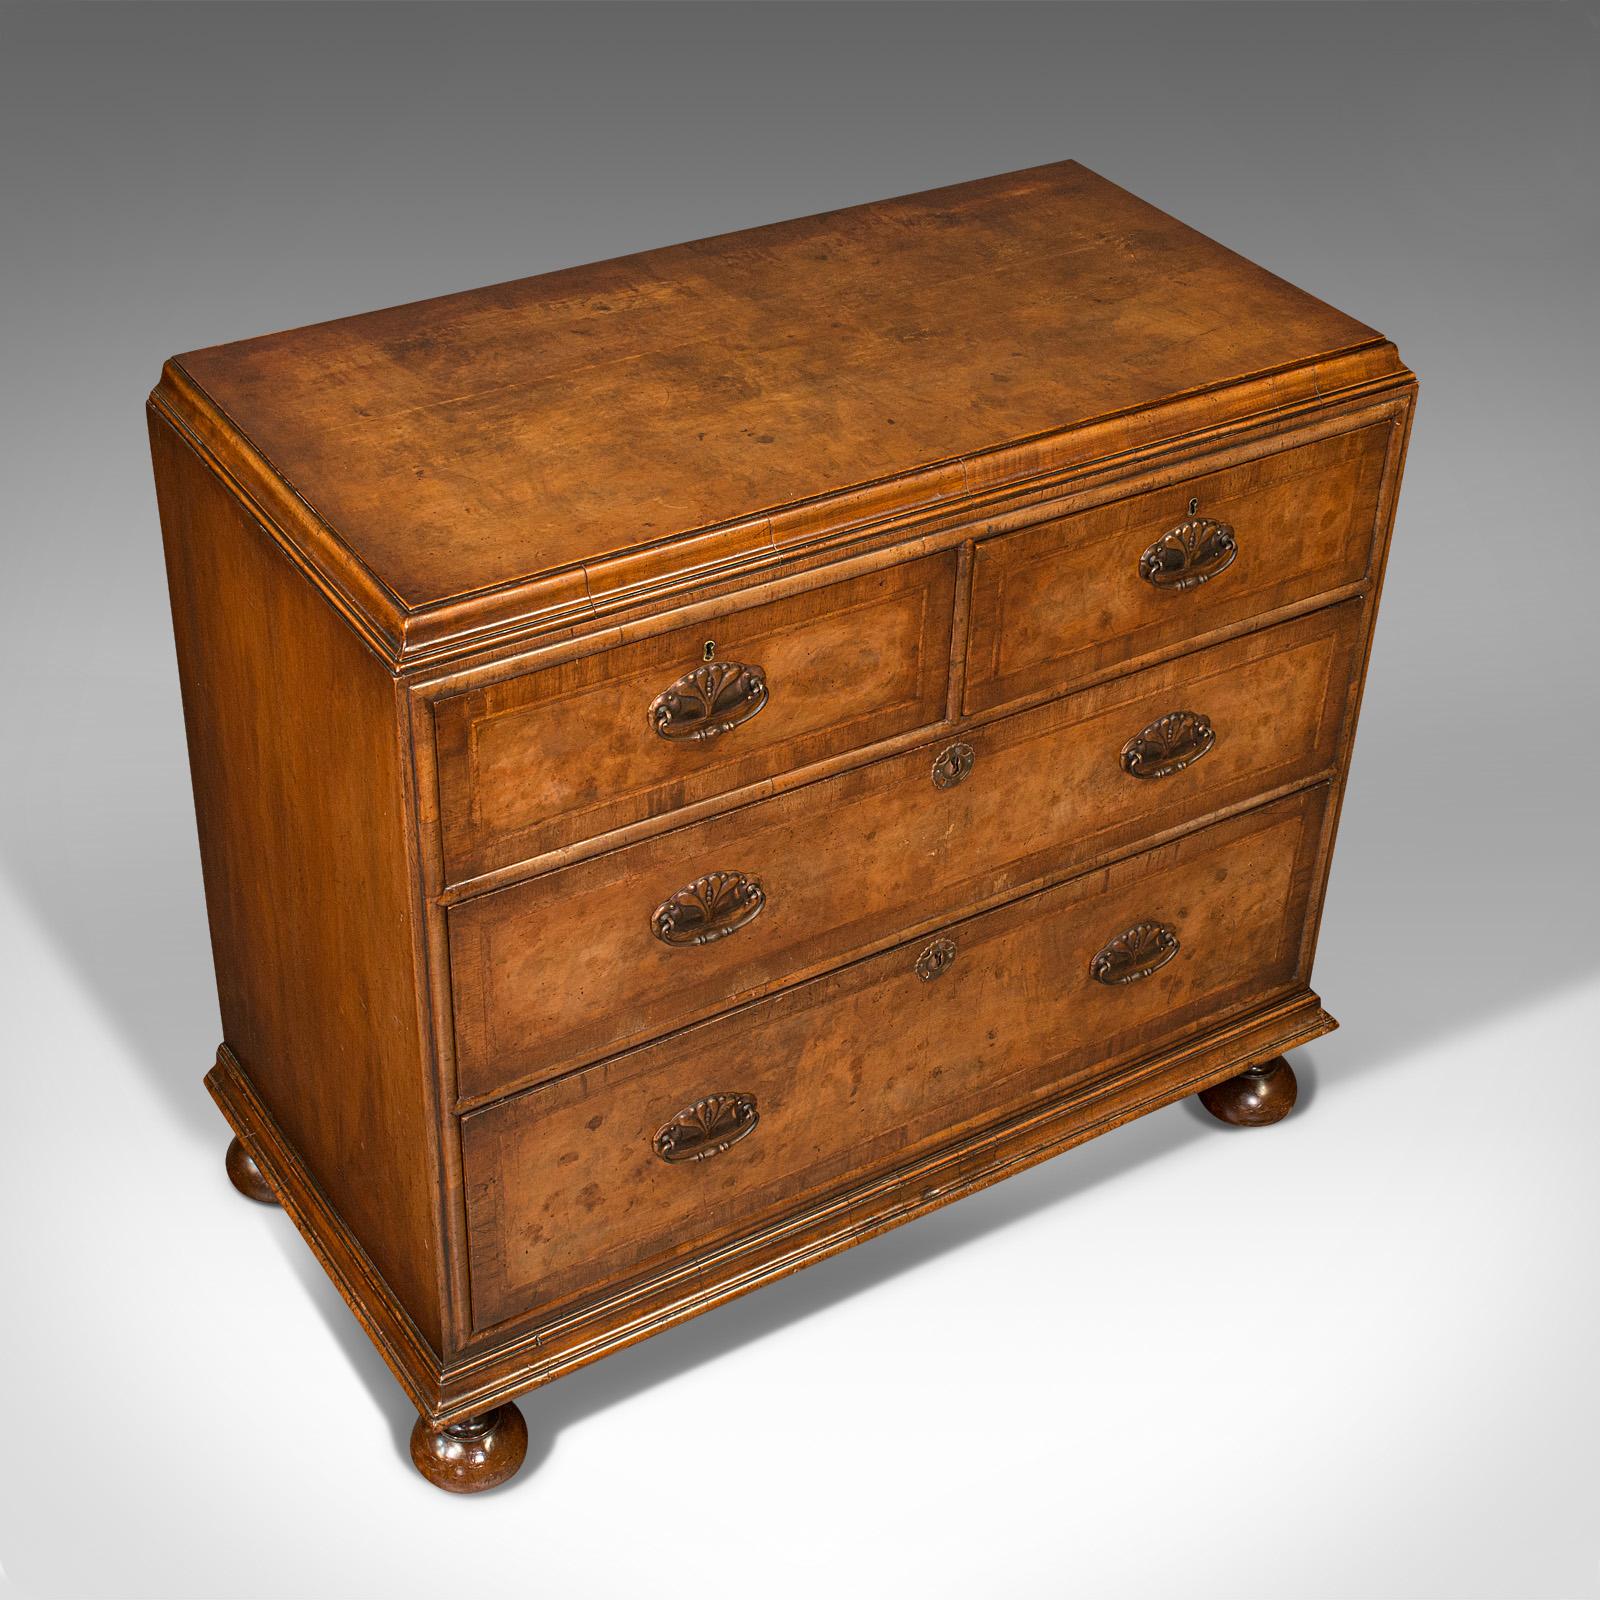 19th Century Antique Chest of Drawers, English, Walnut, Bedroom, Georgian Revival, Victorian